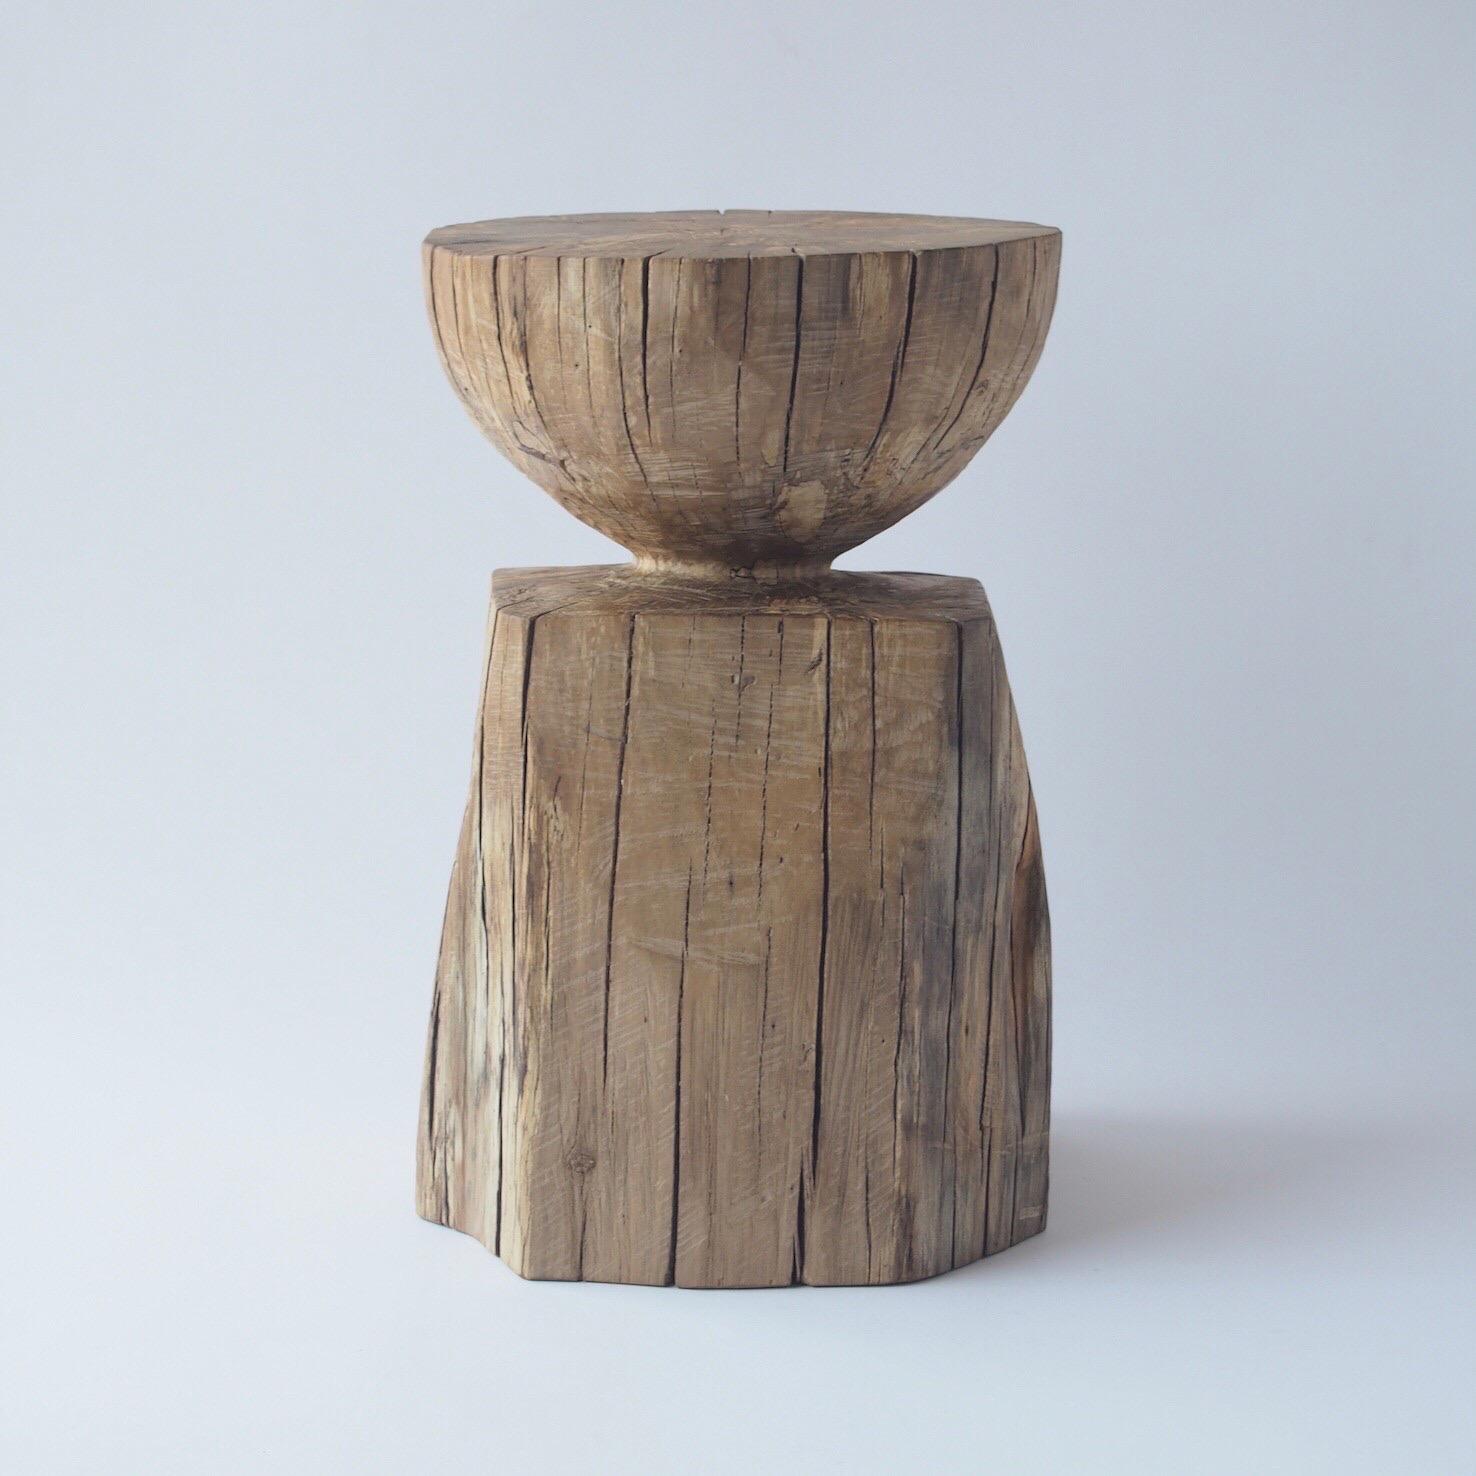 Name: Boy
Sculptural stool by Zogei carved furniture
Material: Shiiki
This work is carved from log with some kinds of chainsaws.
Most of wood used for Nishimura's works are unable to use anything, these woods are unsuitable material for